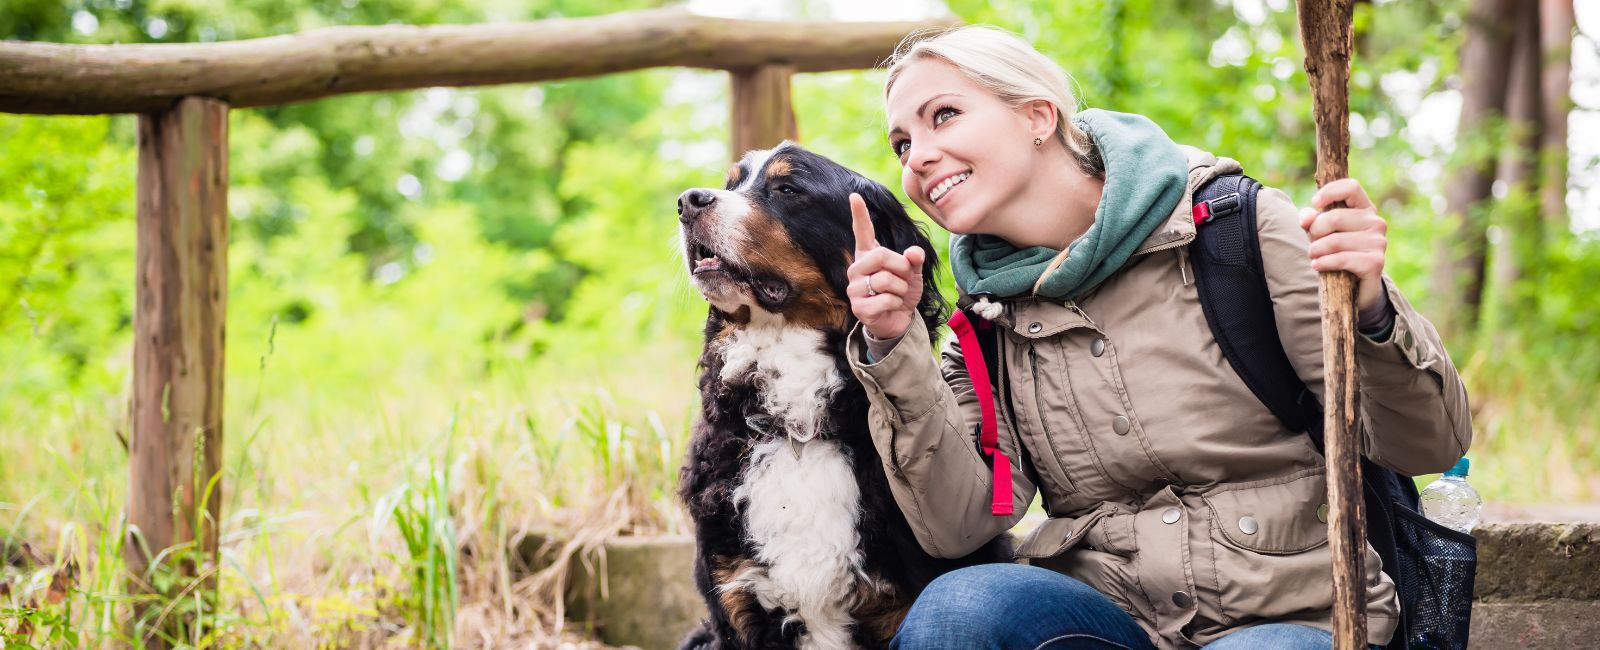 blonde woman with a walking stick sitting next to her Bernese mountain dog in the woods